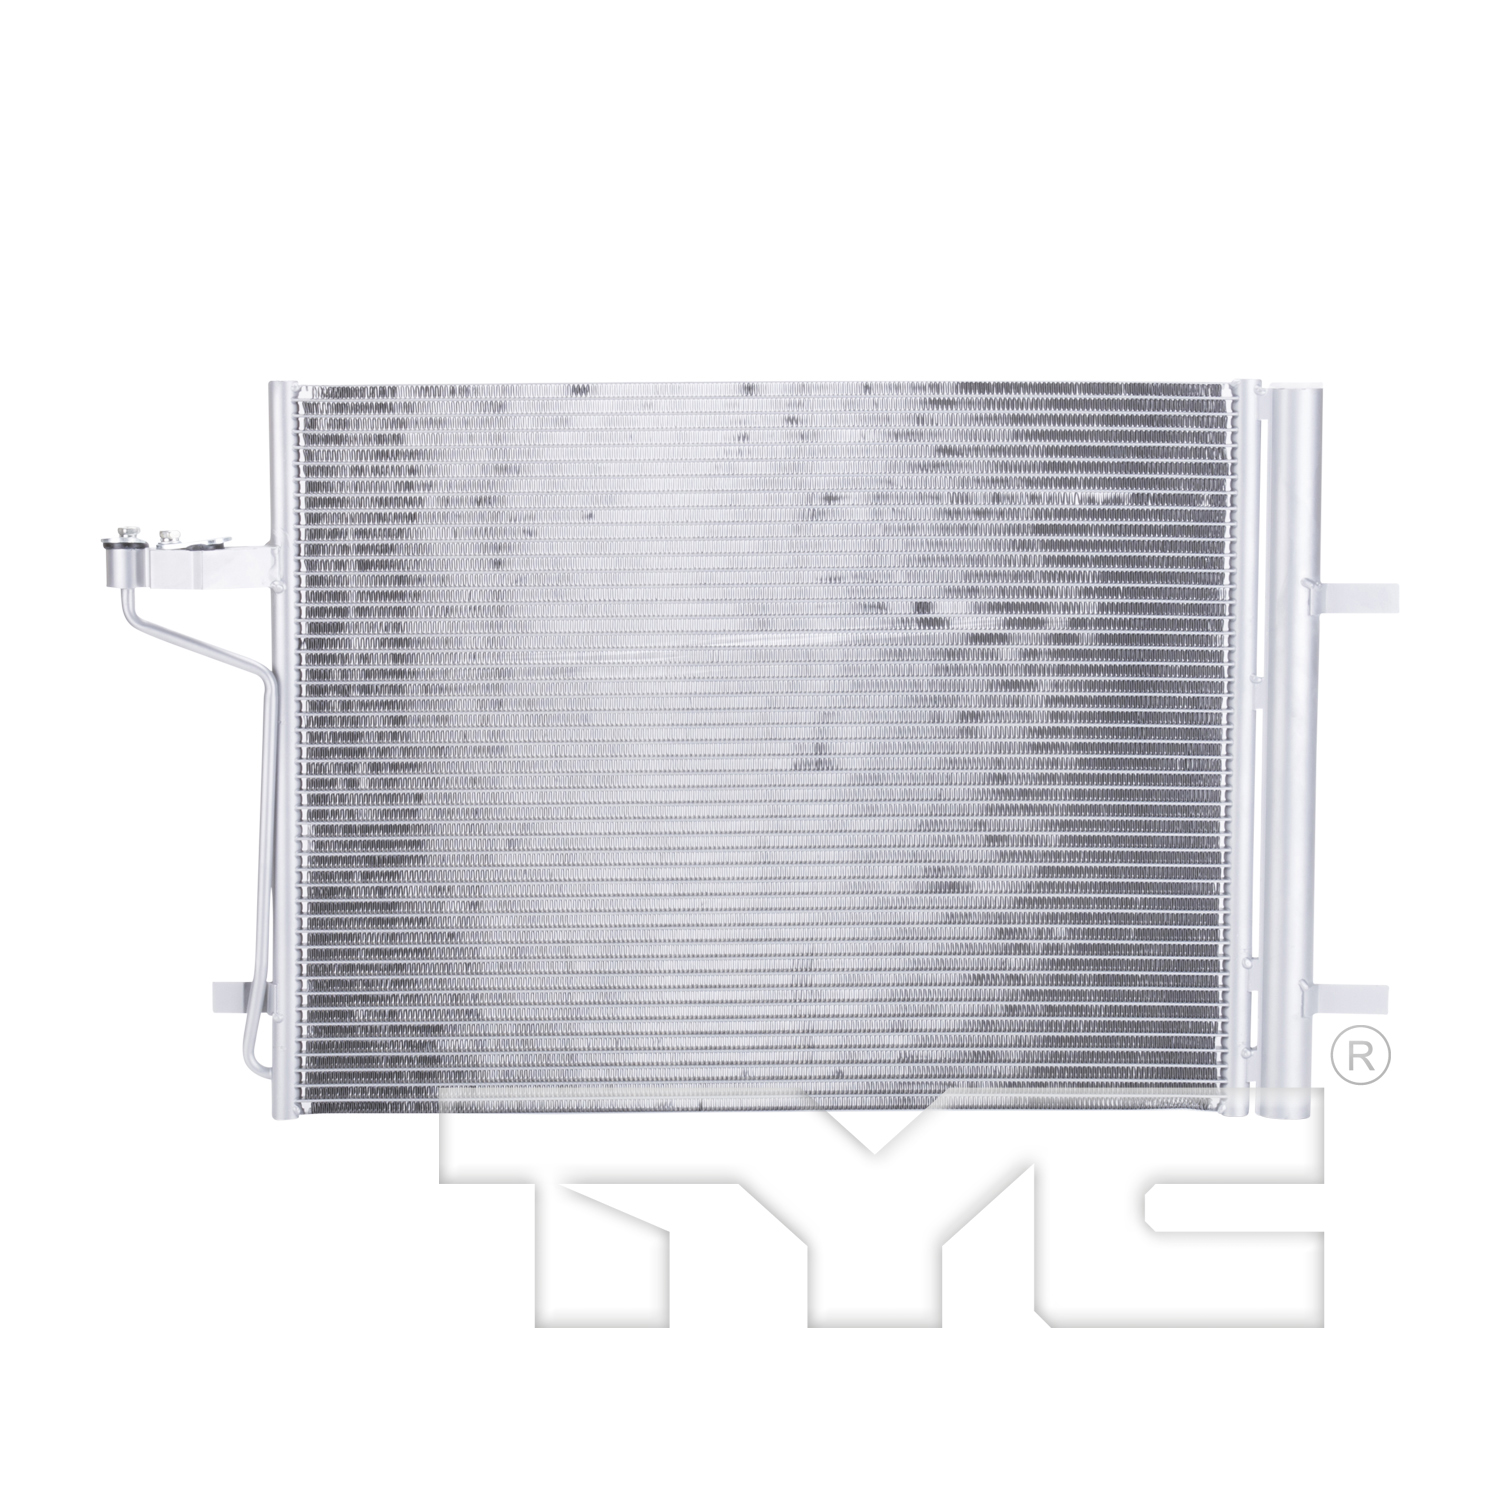 Aftermarket AC CONDENSERS for FORD - ESCAPE, ESCAPE,13-19,Air conditioning condenser